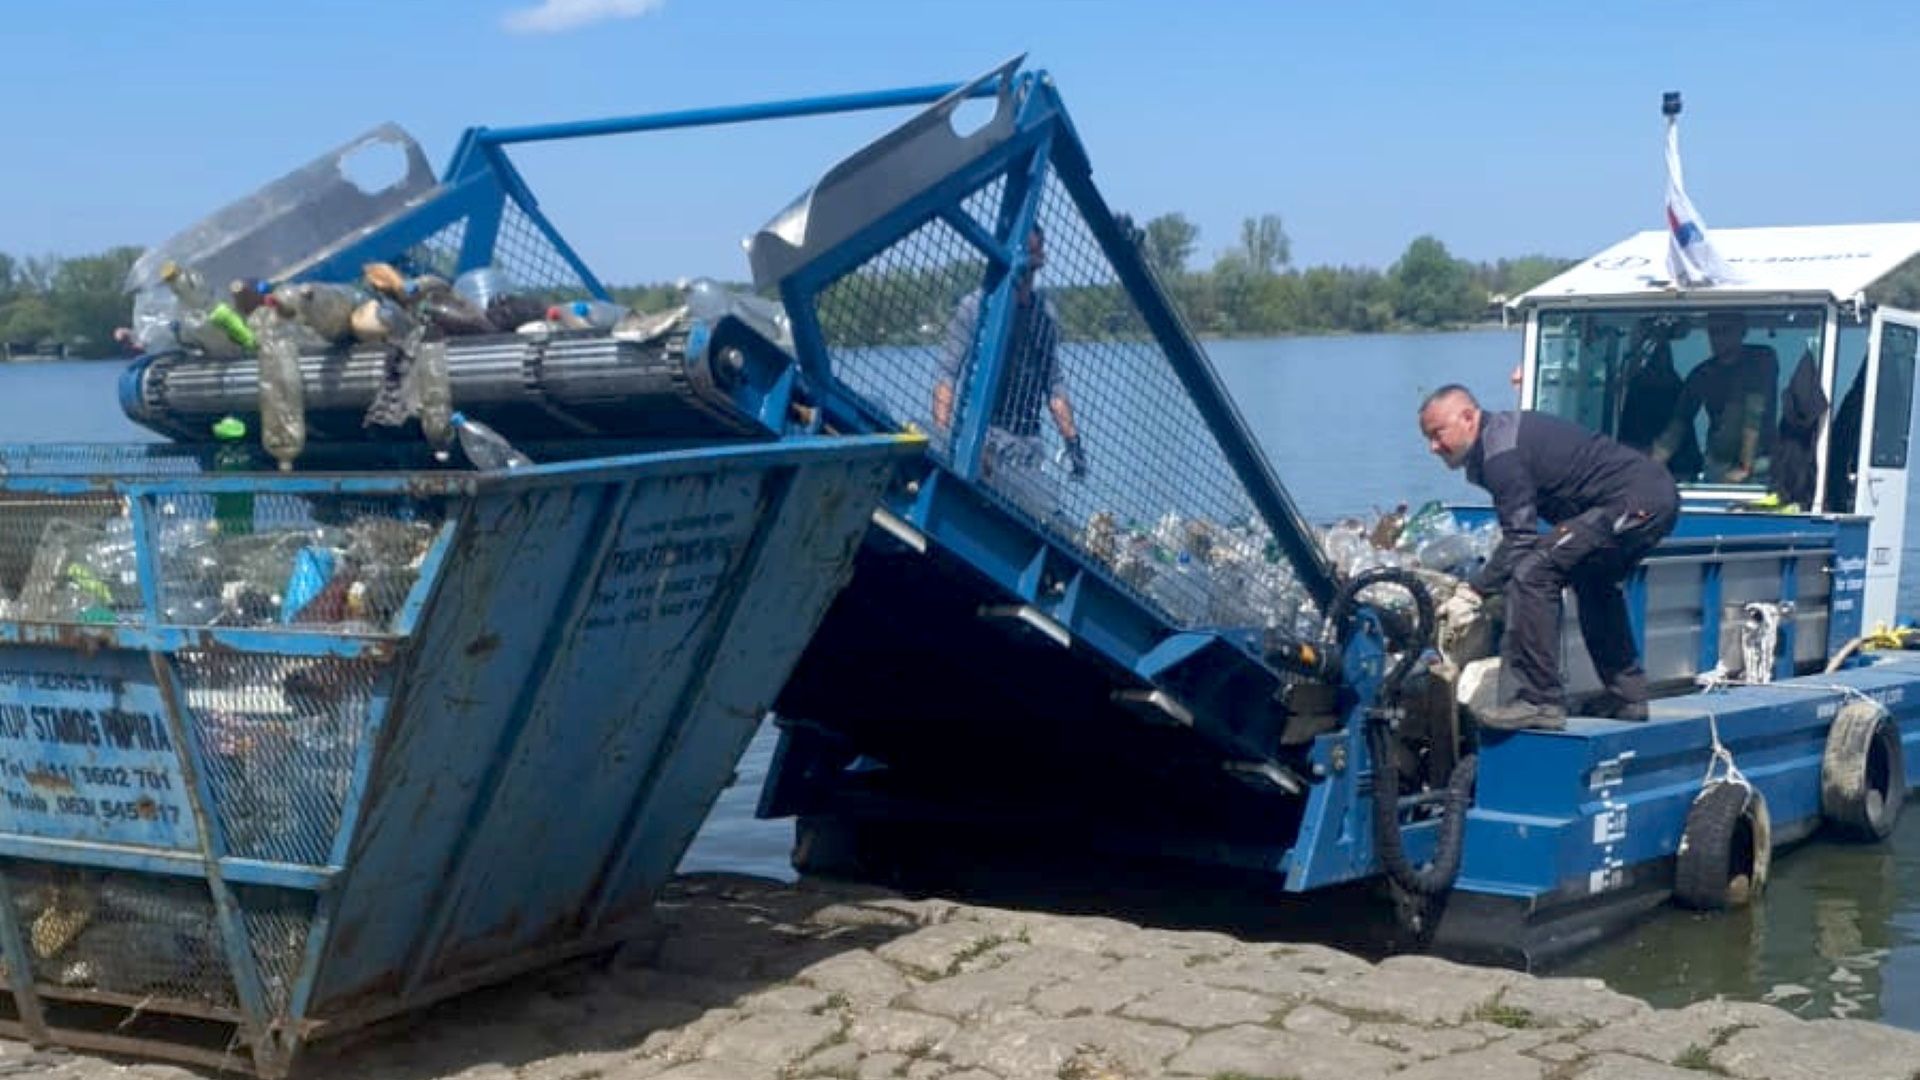 05 May 2021 | End of mission | Today the mission of the garbage collection boat in Serbia ends. The campaign was a great success! Over three tons of plastic waste could be taken out of the water. And not only garbage was collected, but also important data on the composition of the garbage carpets, that allows valuable conclusions to be drawn about the causes of the pollution. Many thanks to our local cooperation partners, the environmental NGO Udruzenje 3e, the University of Belgrade and local companies who actively supported the campaign. 